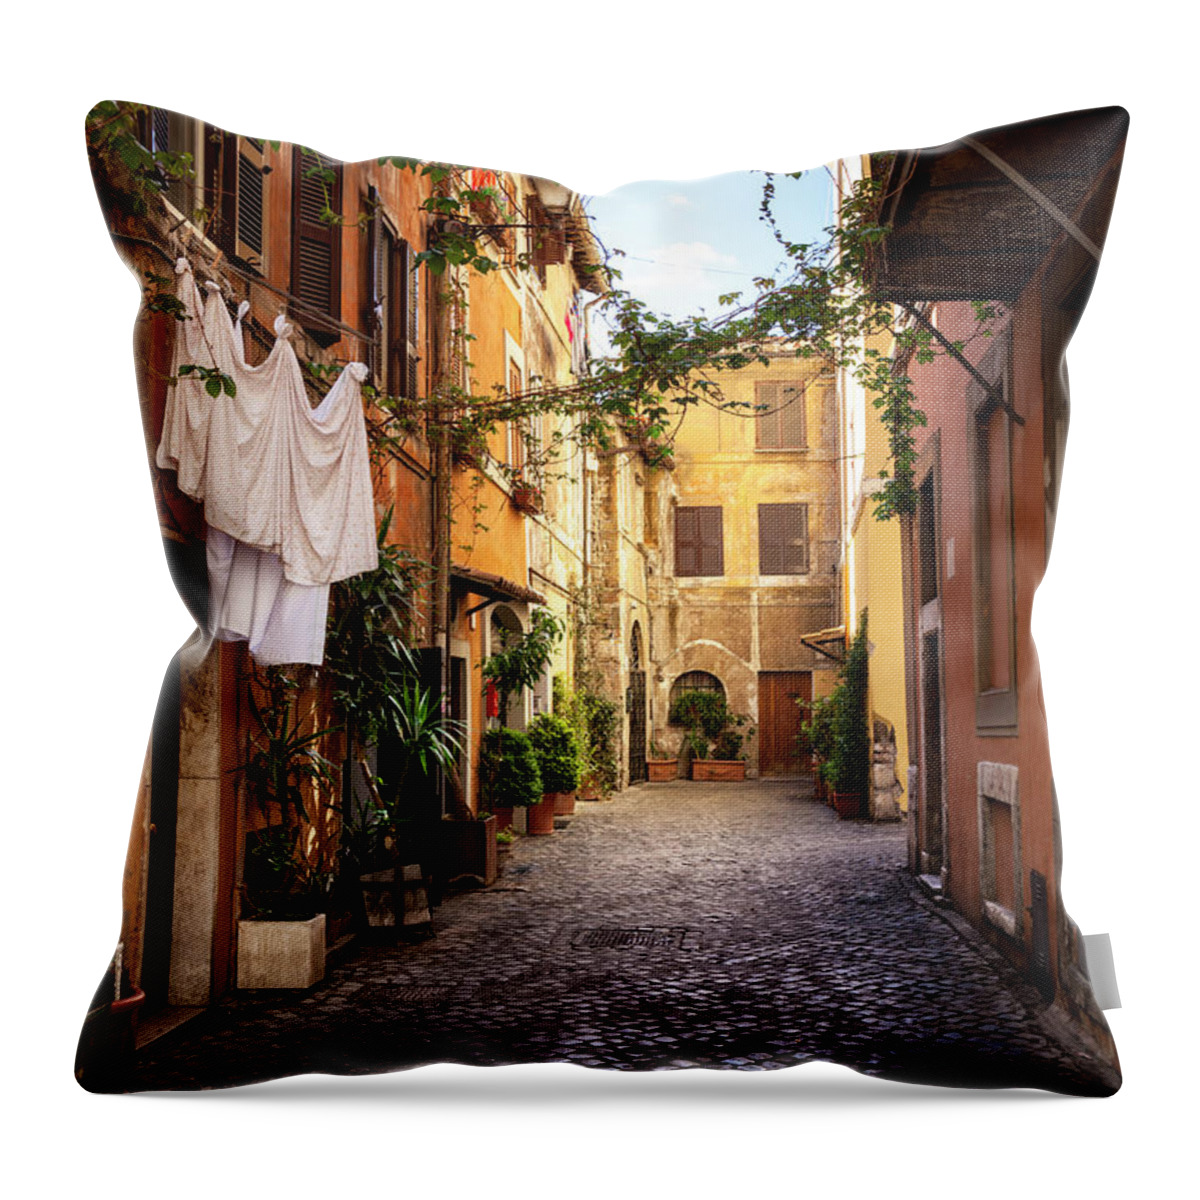 Roman Throw Pillow featuring the photograph Italian Old Town Trastevere In Rome by Spooh